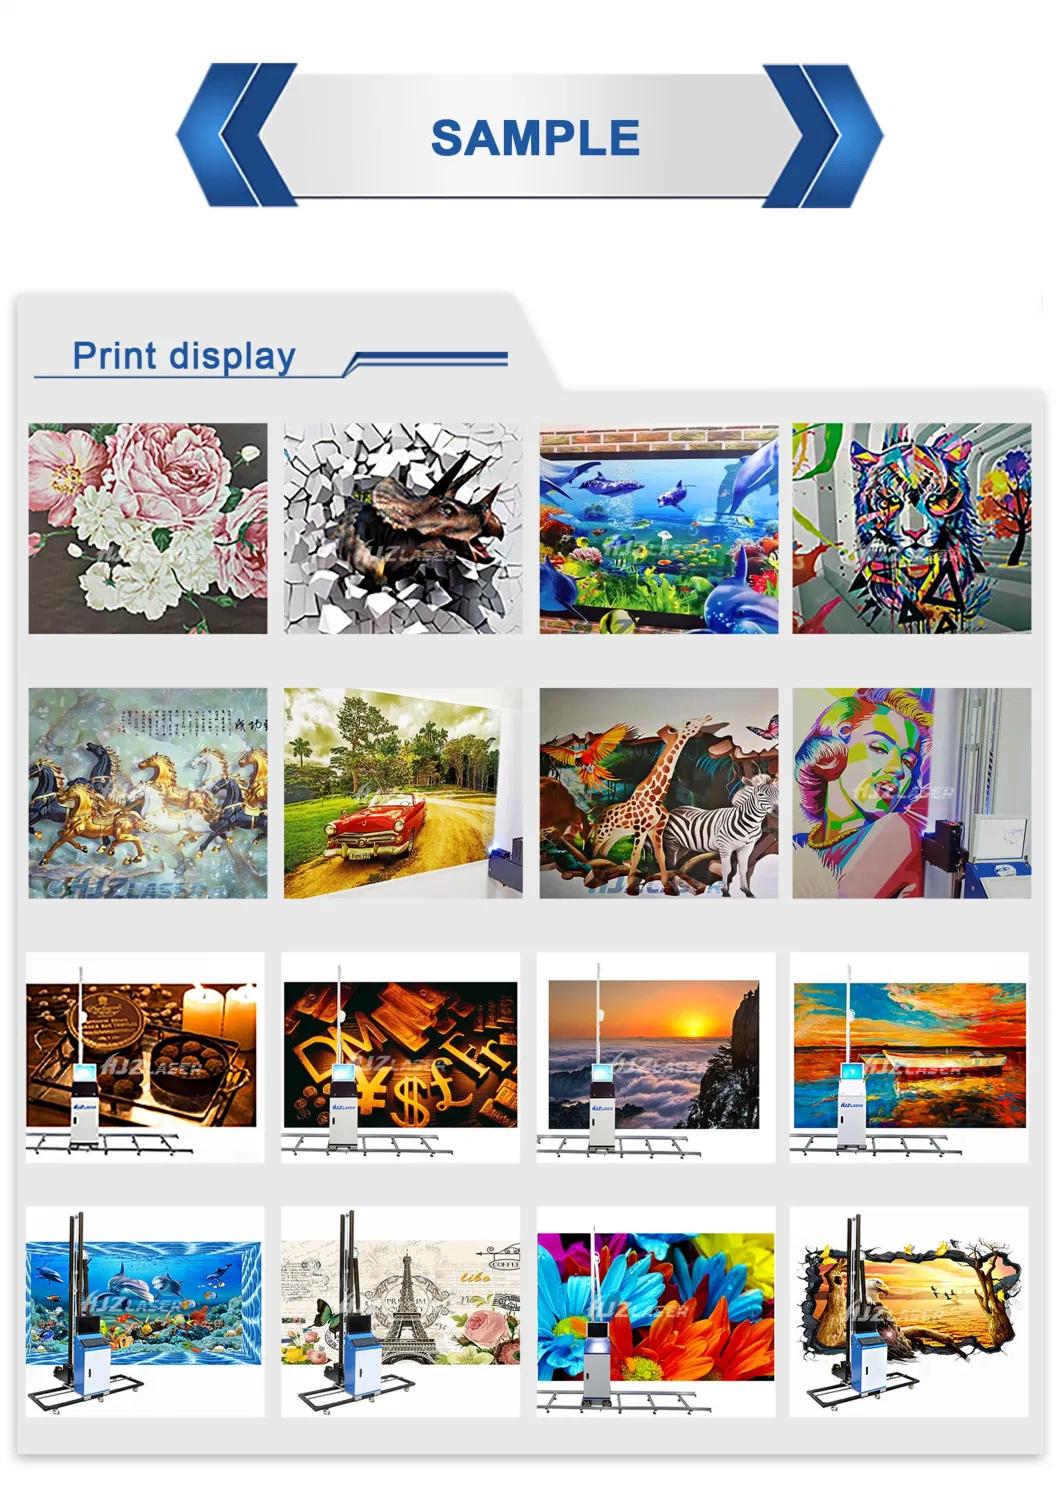 Hjz Leading Manufacturer of 3D Wall Printer Colorful Decorative Printing Machine for Wall Painting Machine